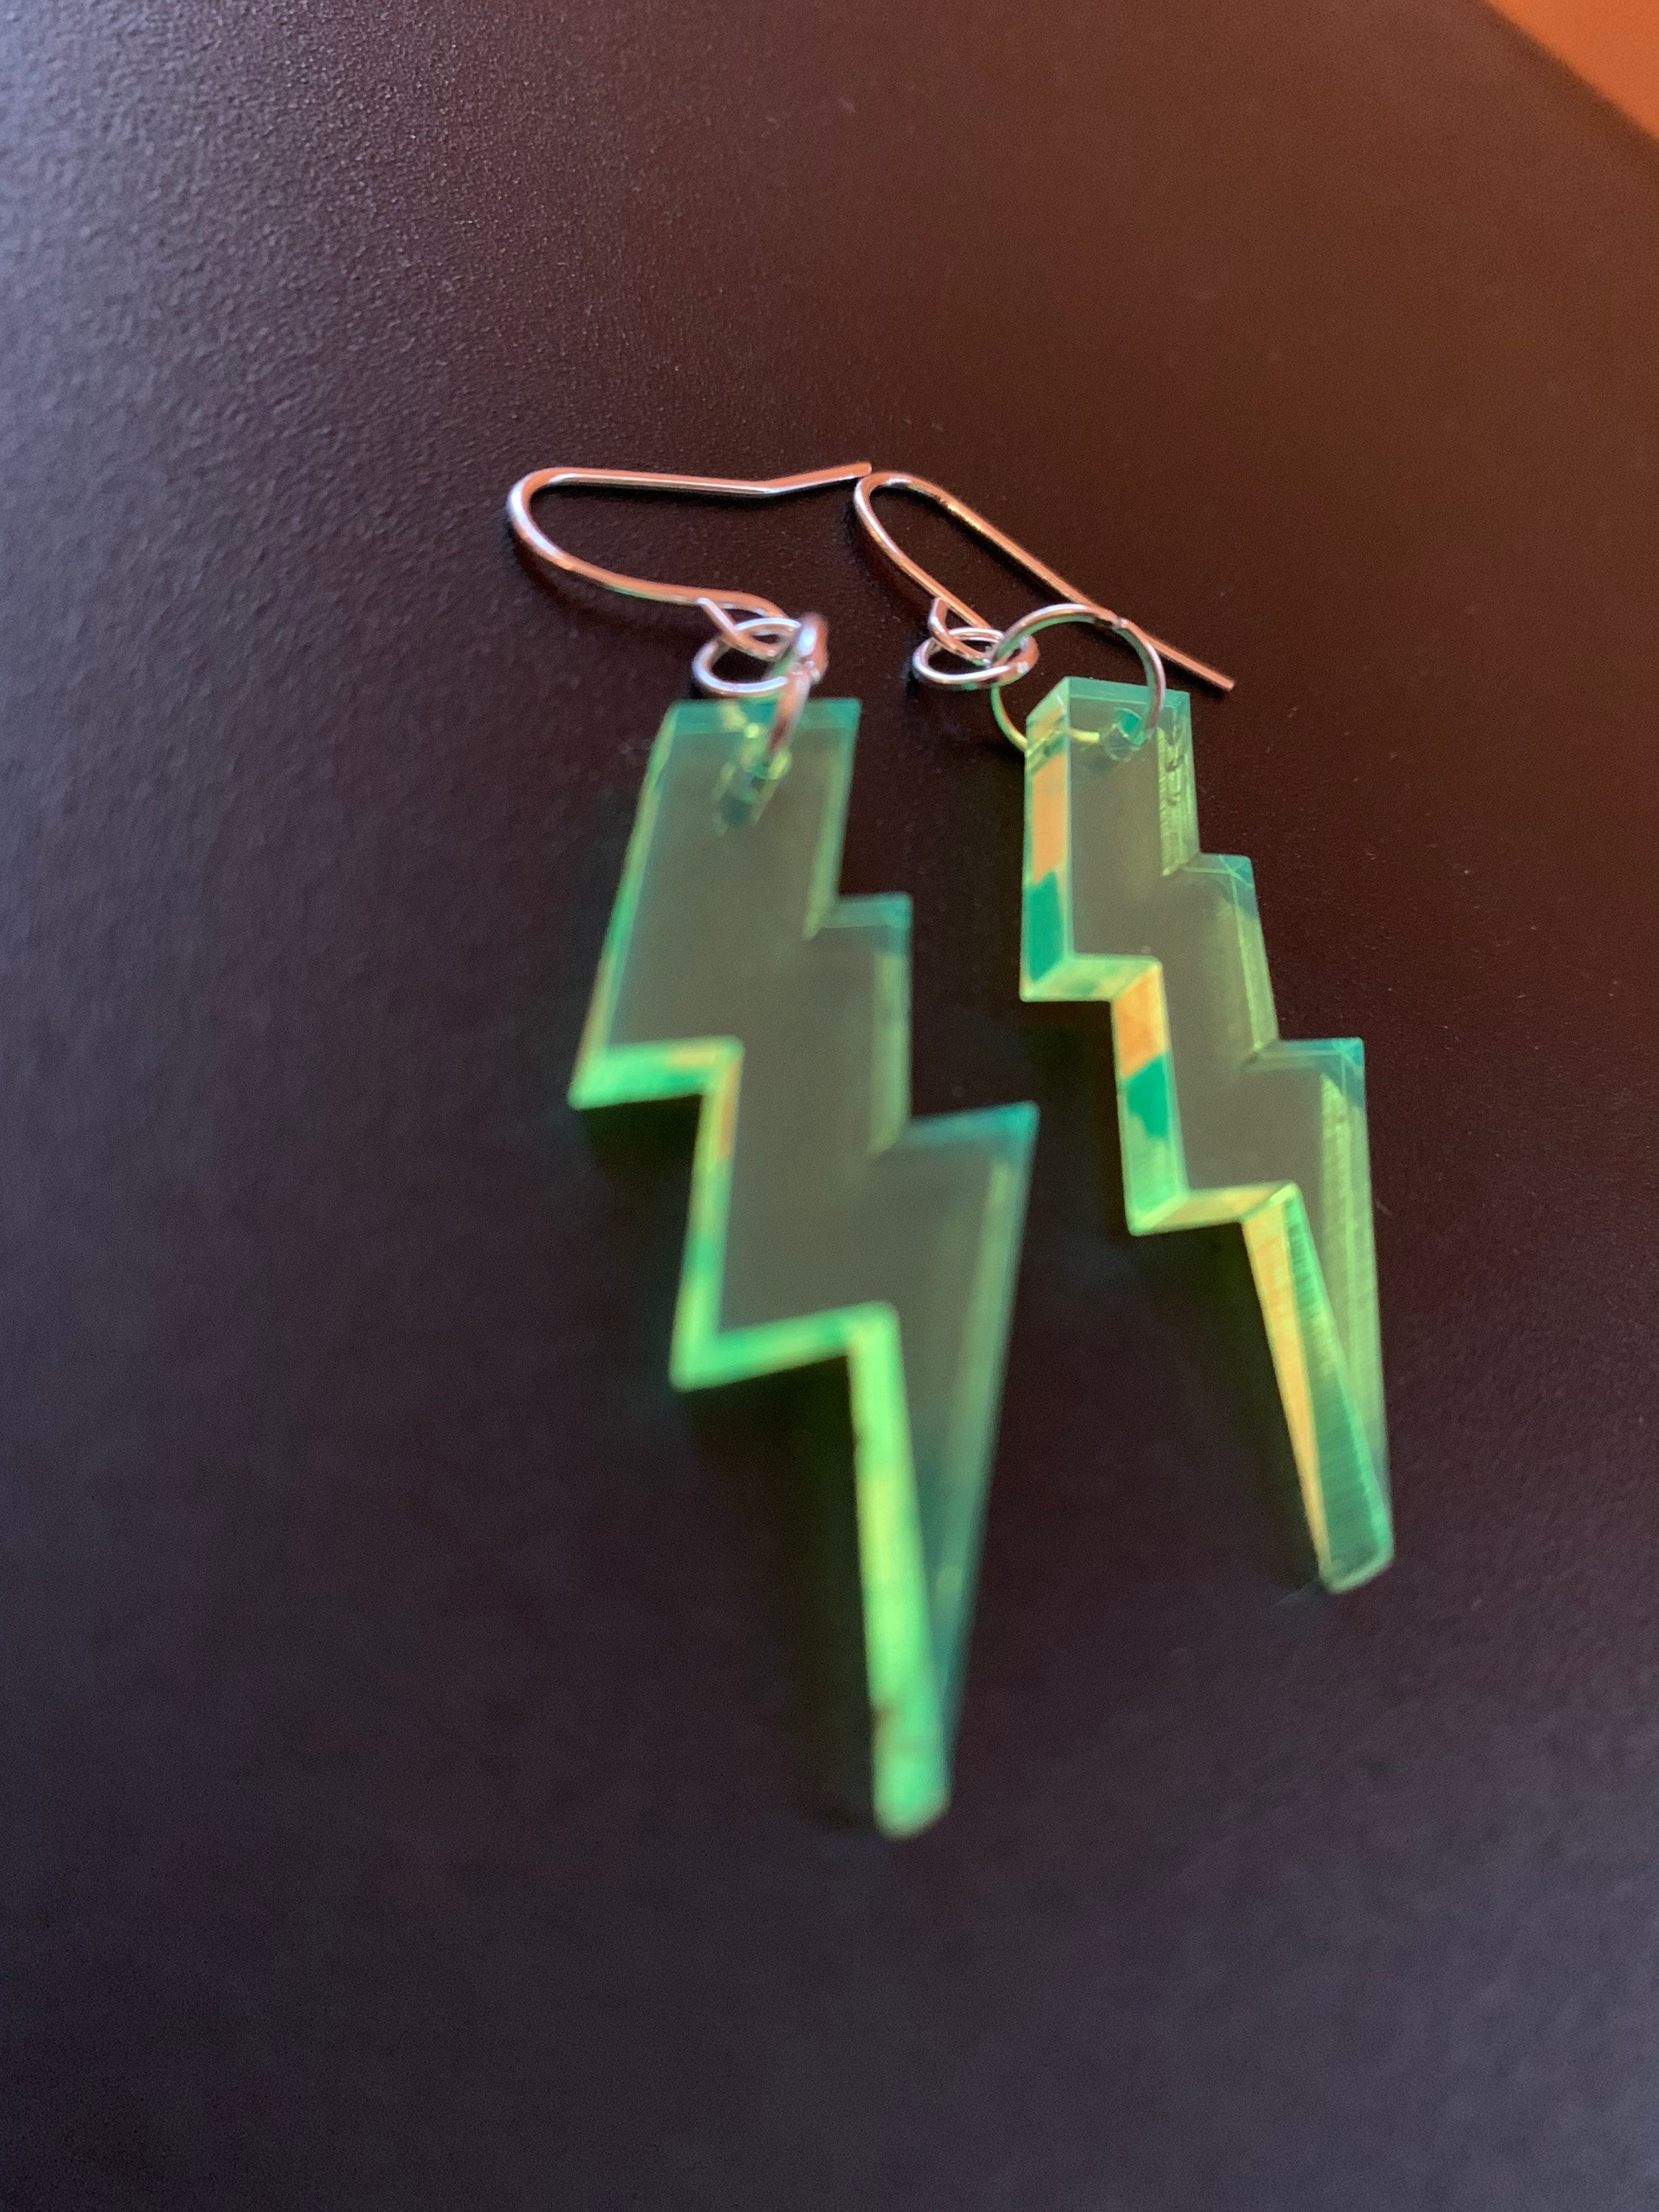 Amazoncom Neon Yellow Bright Acrylic Lightning Bolt Neon Dangle Earrings  with Nickel Free Hooks Glows in Blacklight  Handmade Products